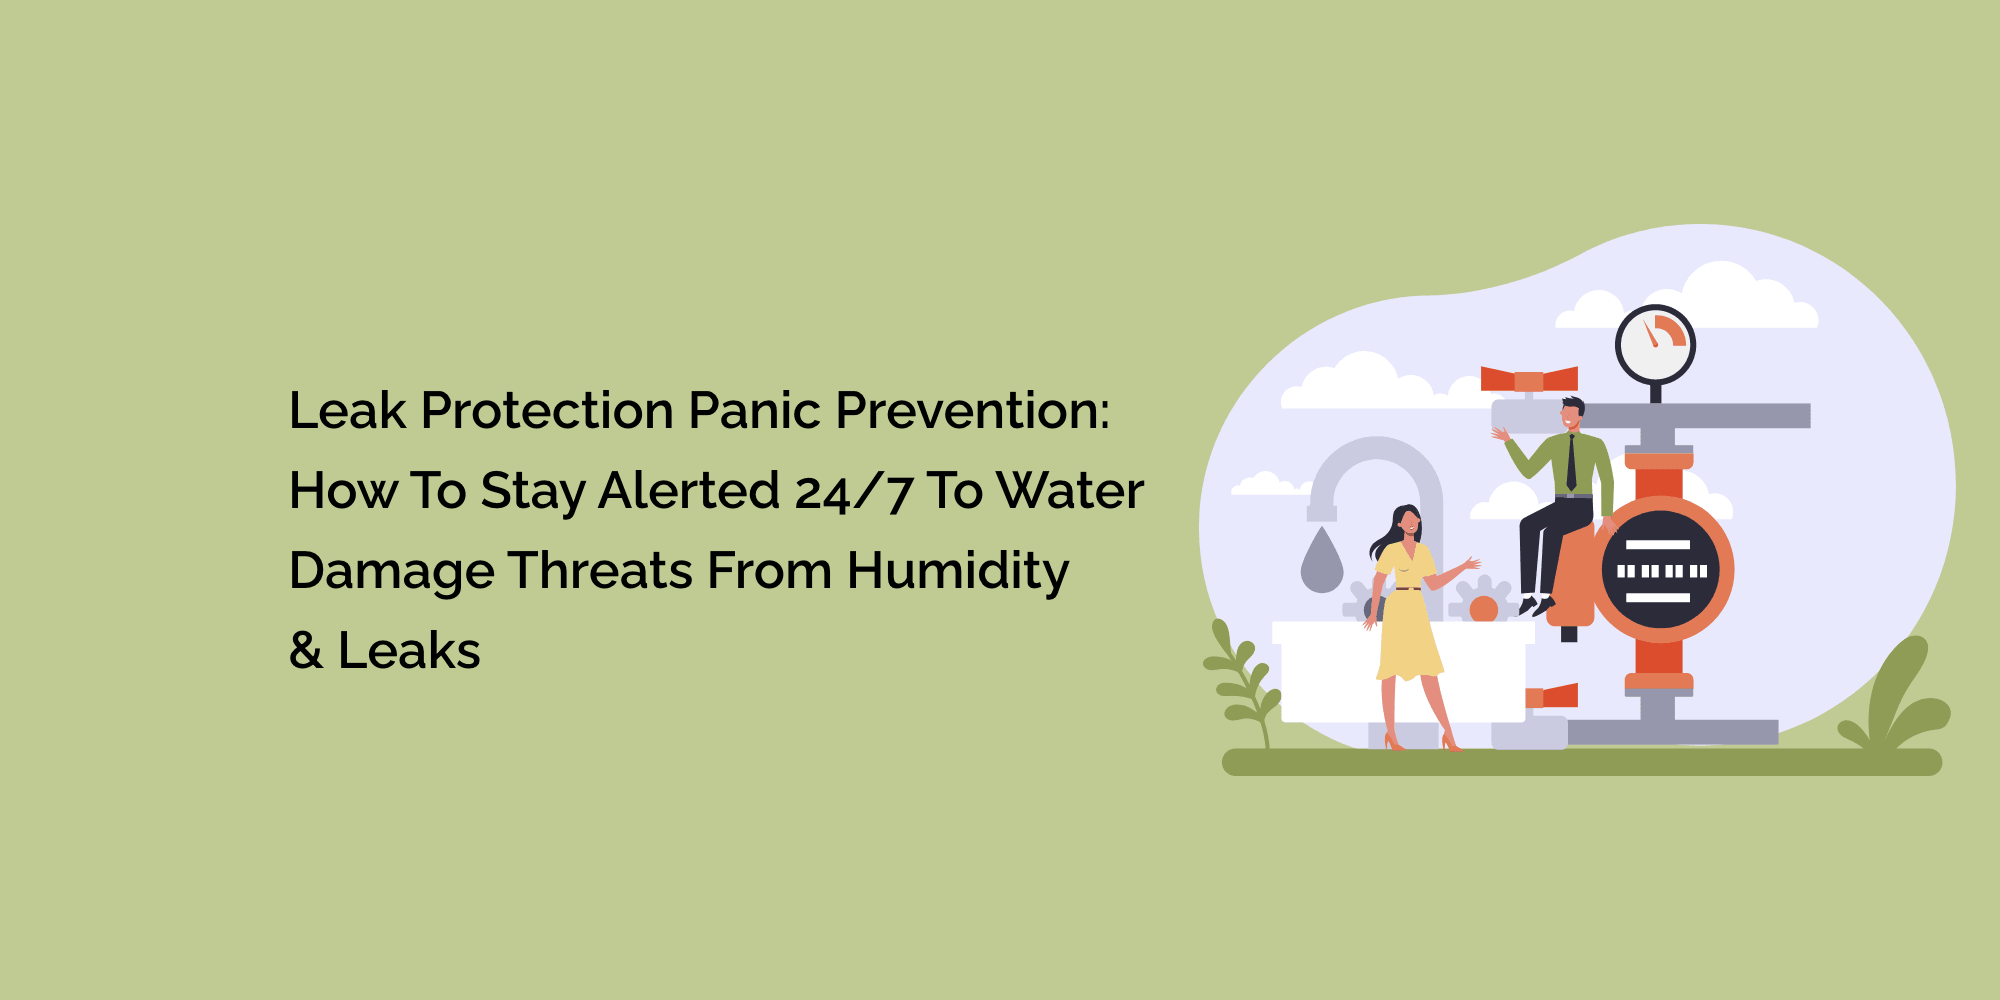 Leak Protection Panic Prevention: How to Stay Alerted 24/7 to Water Damage Threats from Humidity and Leaks